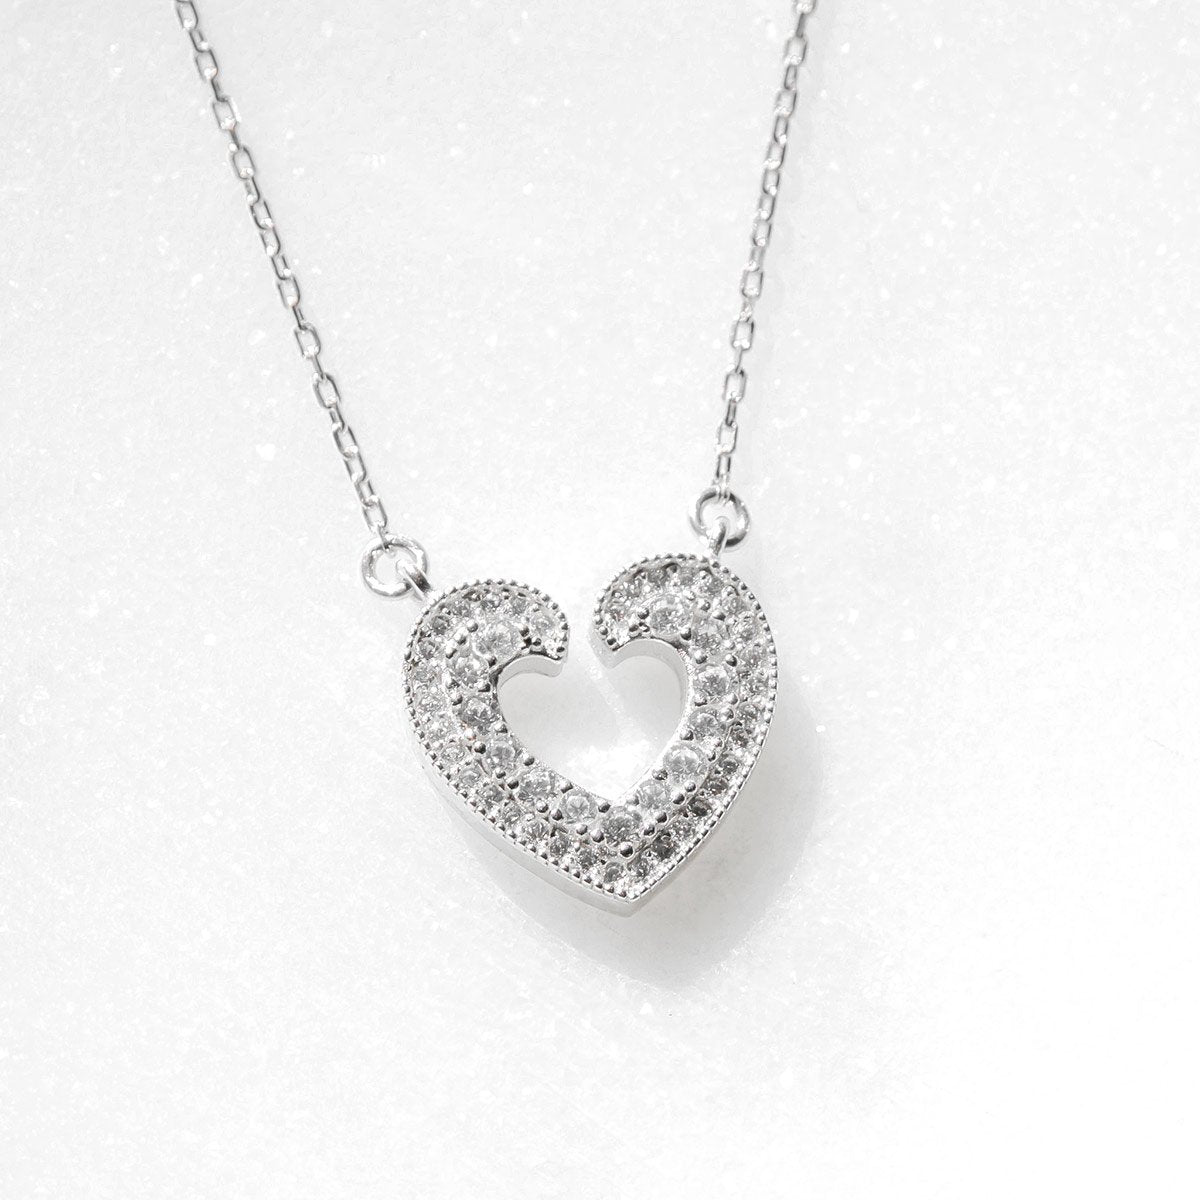 Totally Crazy (Circle Version) - Sterling Silver Open Heart Necklace Gift Set